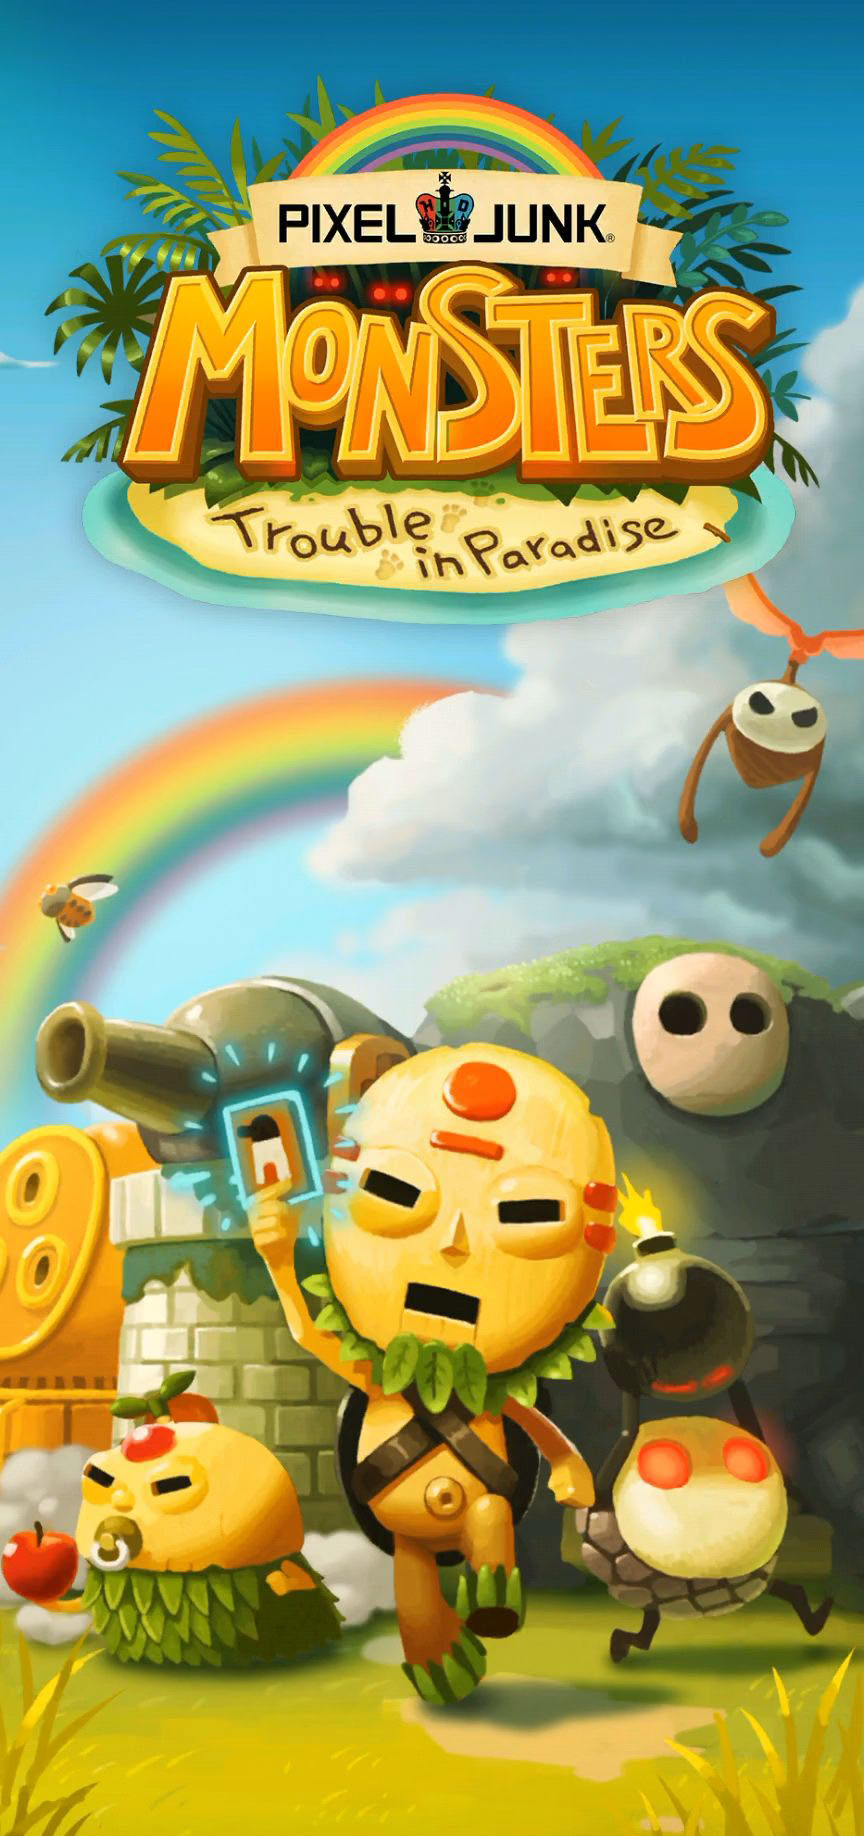 Full version of Android TD game apk PixelJunk Monsters for tablet and phone.